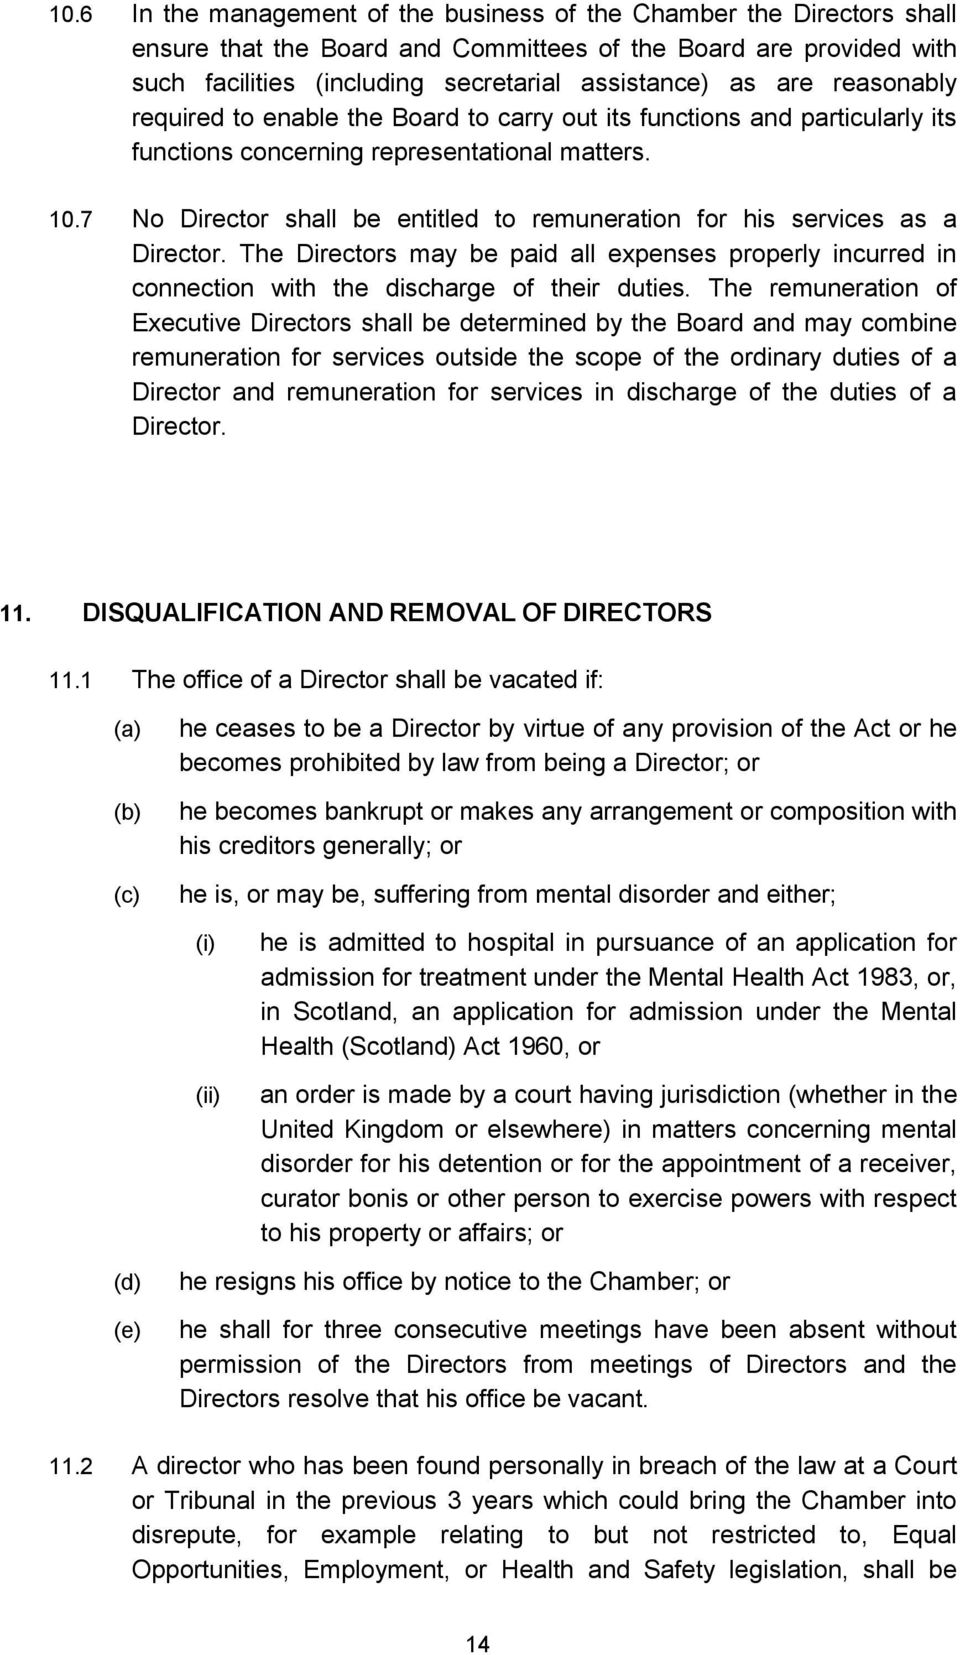 7 No Director shall be entitled to remuneration for his services as a Director. The Directors may be paid all expenses properly incurred in connection with the discharge of their duties.